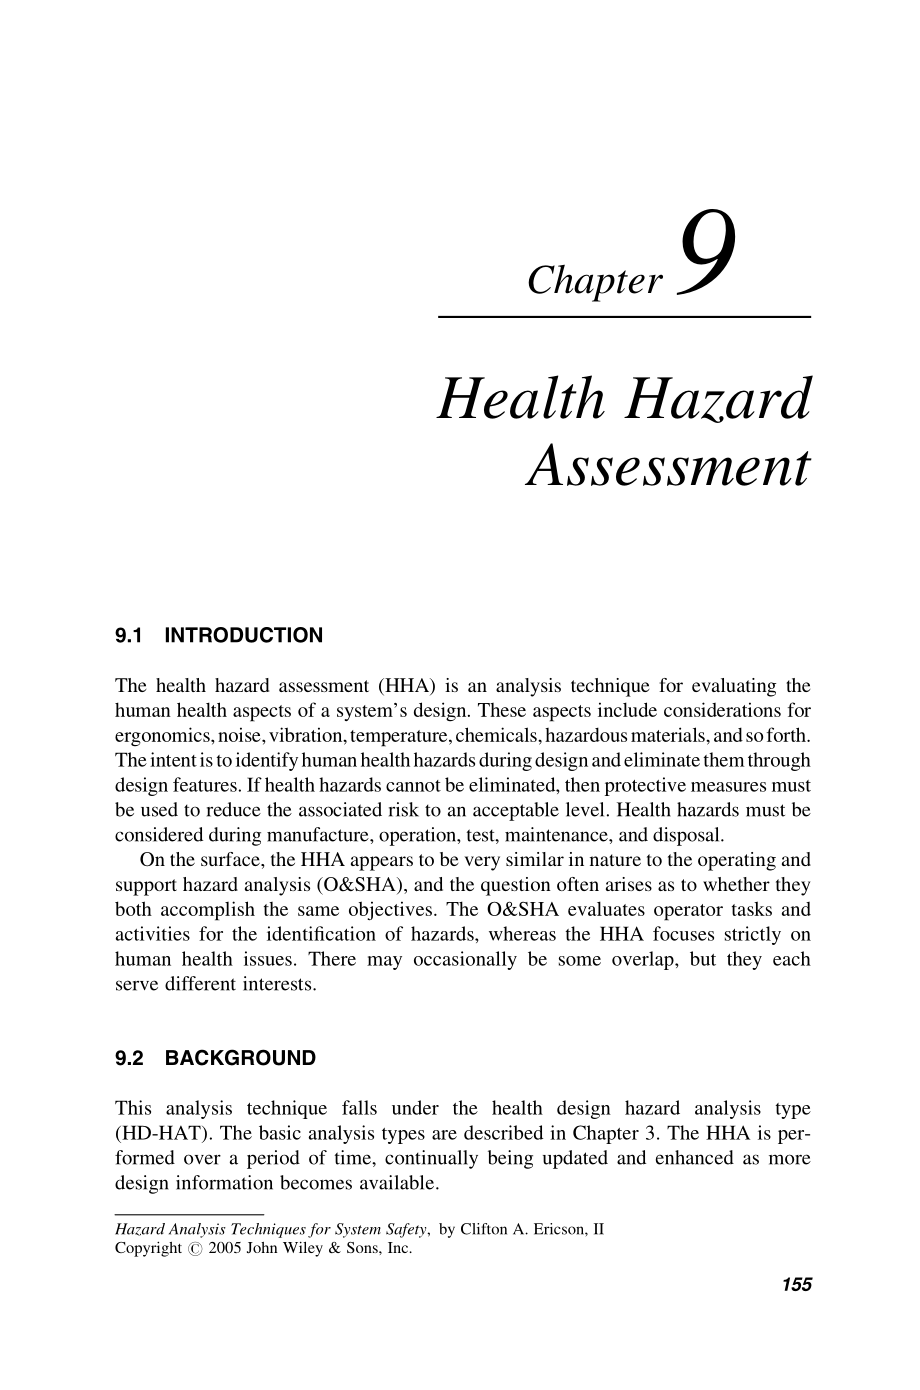 Hazard Analysis Techniques for System Safety Chapter 9.pdf_第1页